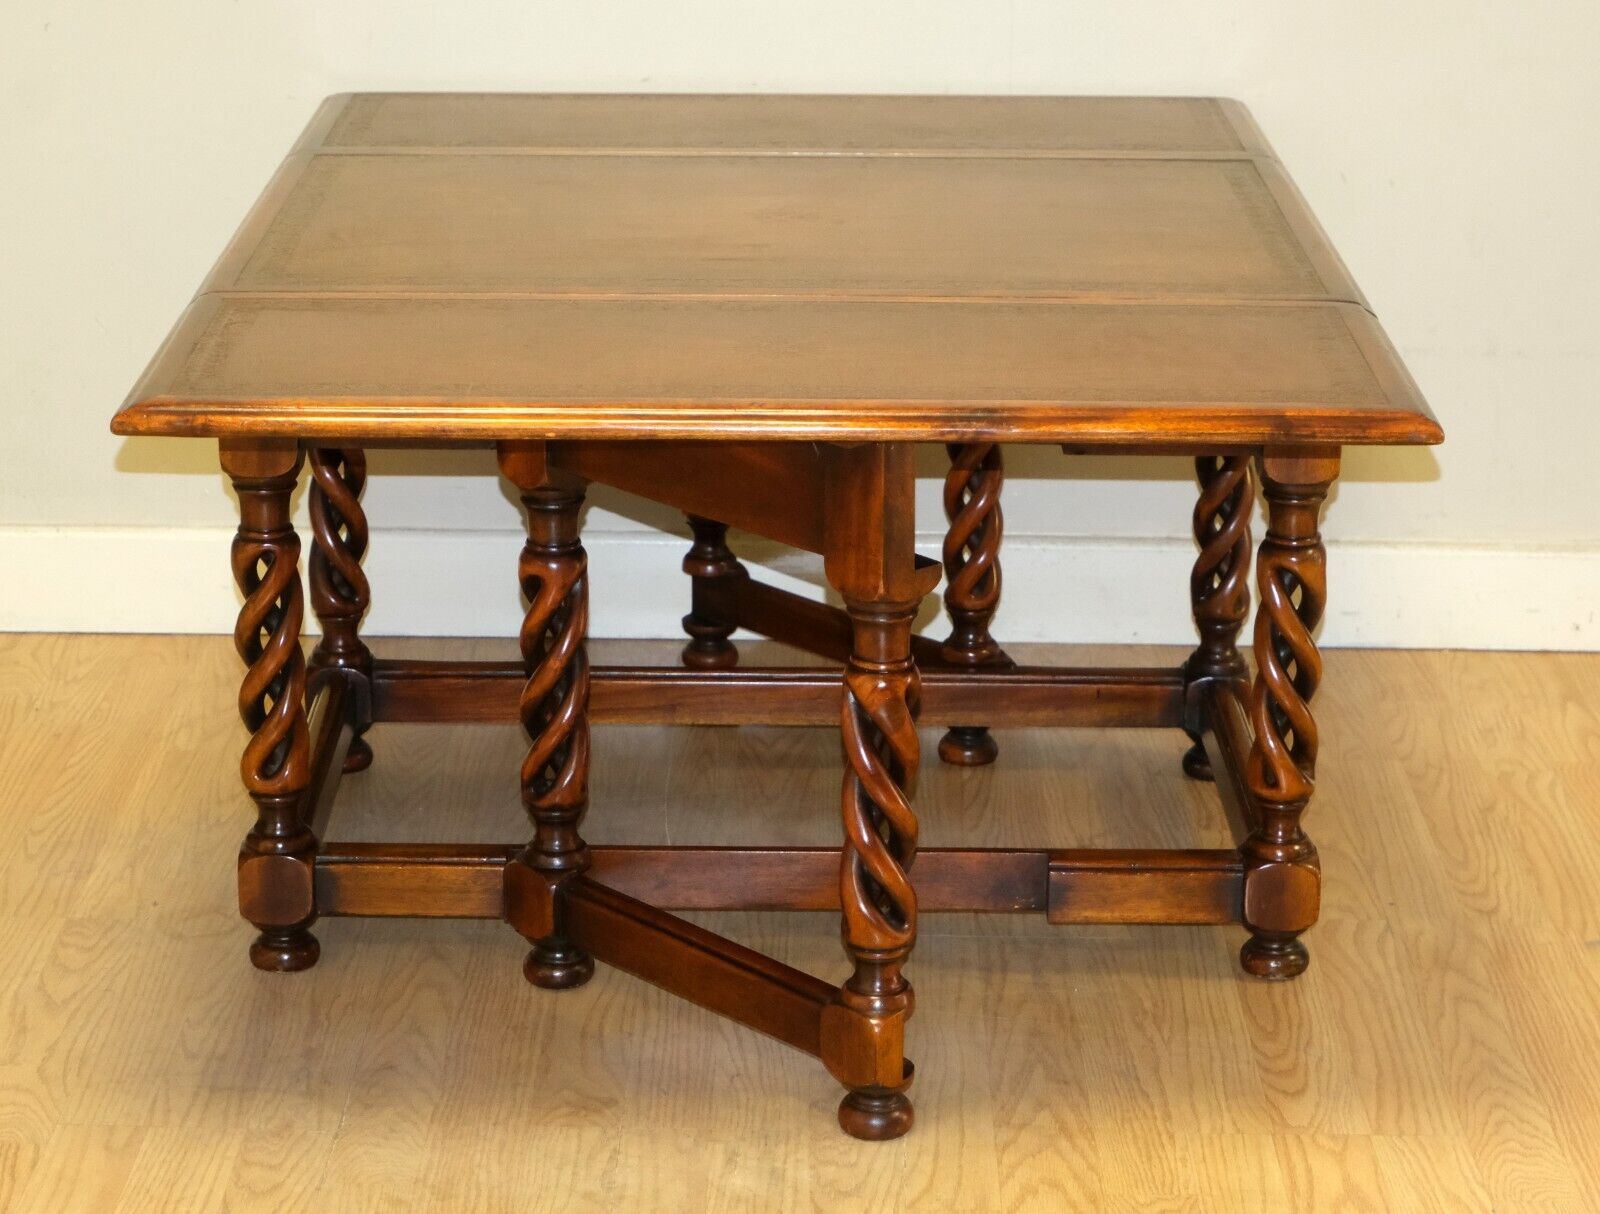 We are delighted to offer for sale this elegant mahogany Theodore Alexander drop leaf brown leather top gate legs table. 

The beautiful twist and the soft combination with the rest of the legs is truly one of a kind. They are well made and